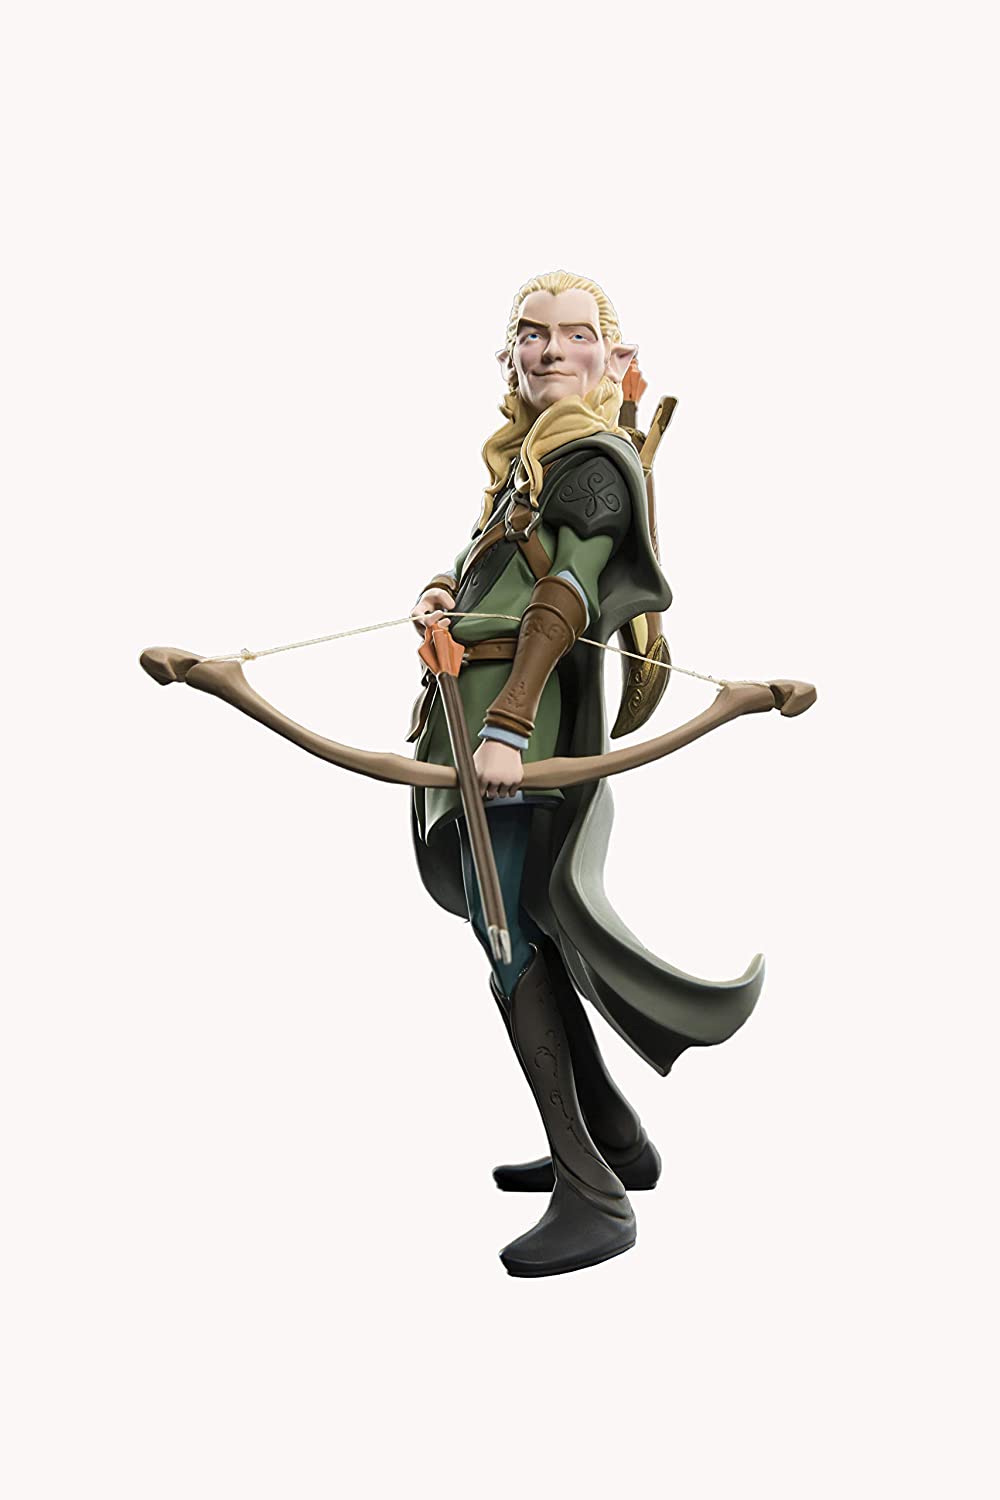 WETA Collectibles WETA865002524 Mini Epics Lord of The Rings Collectable Figure, Multicoloured, Standard